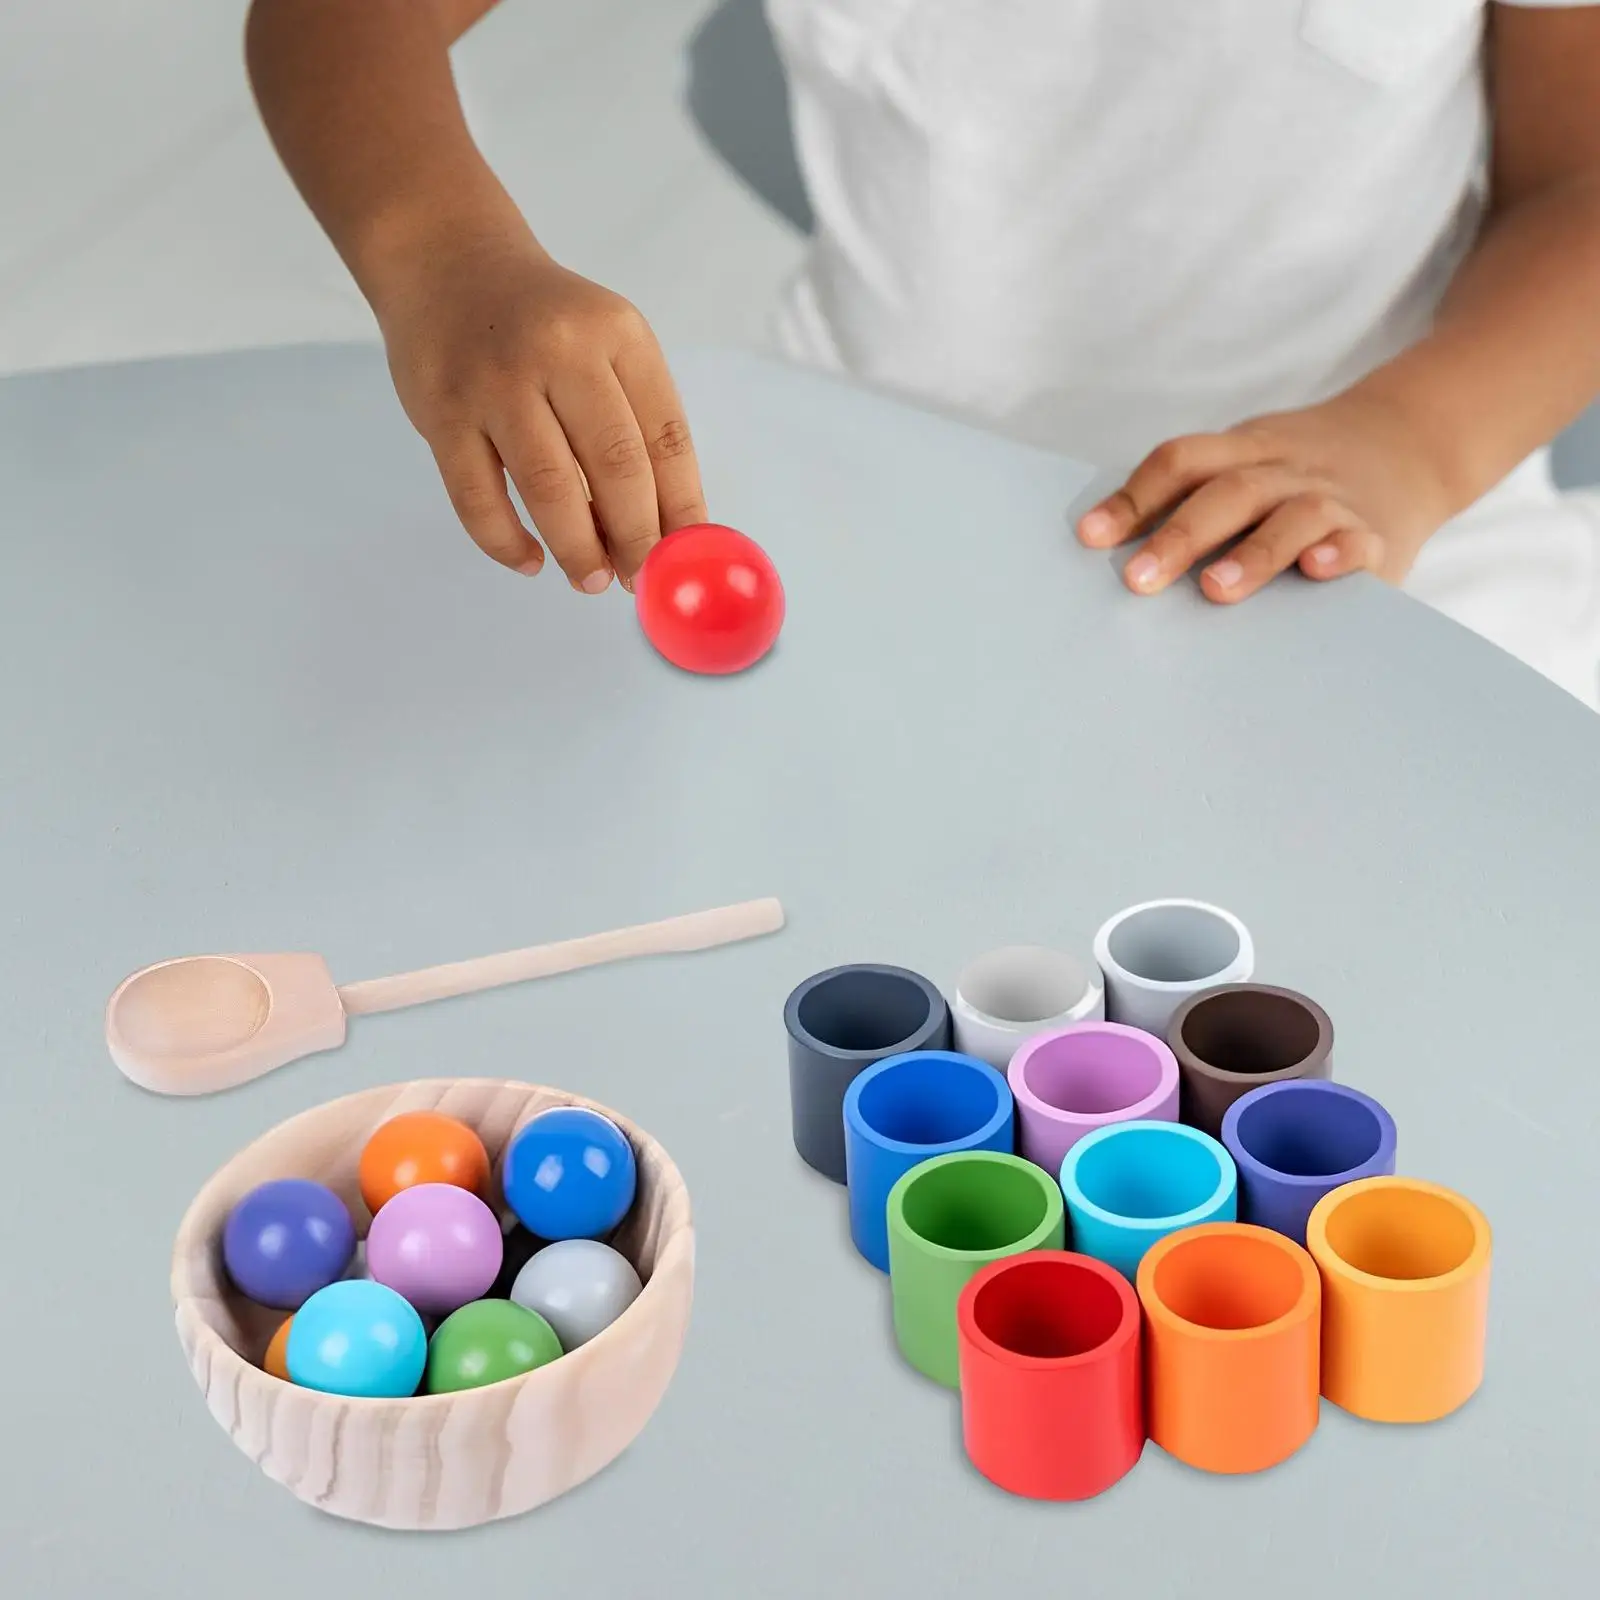 Balls in Cup Montessori Toy Learning Toy Early Education Toys Sorting Game